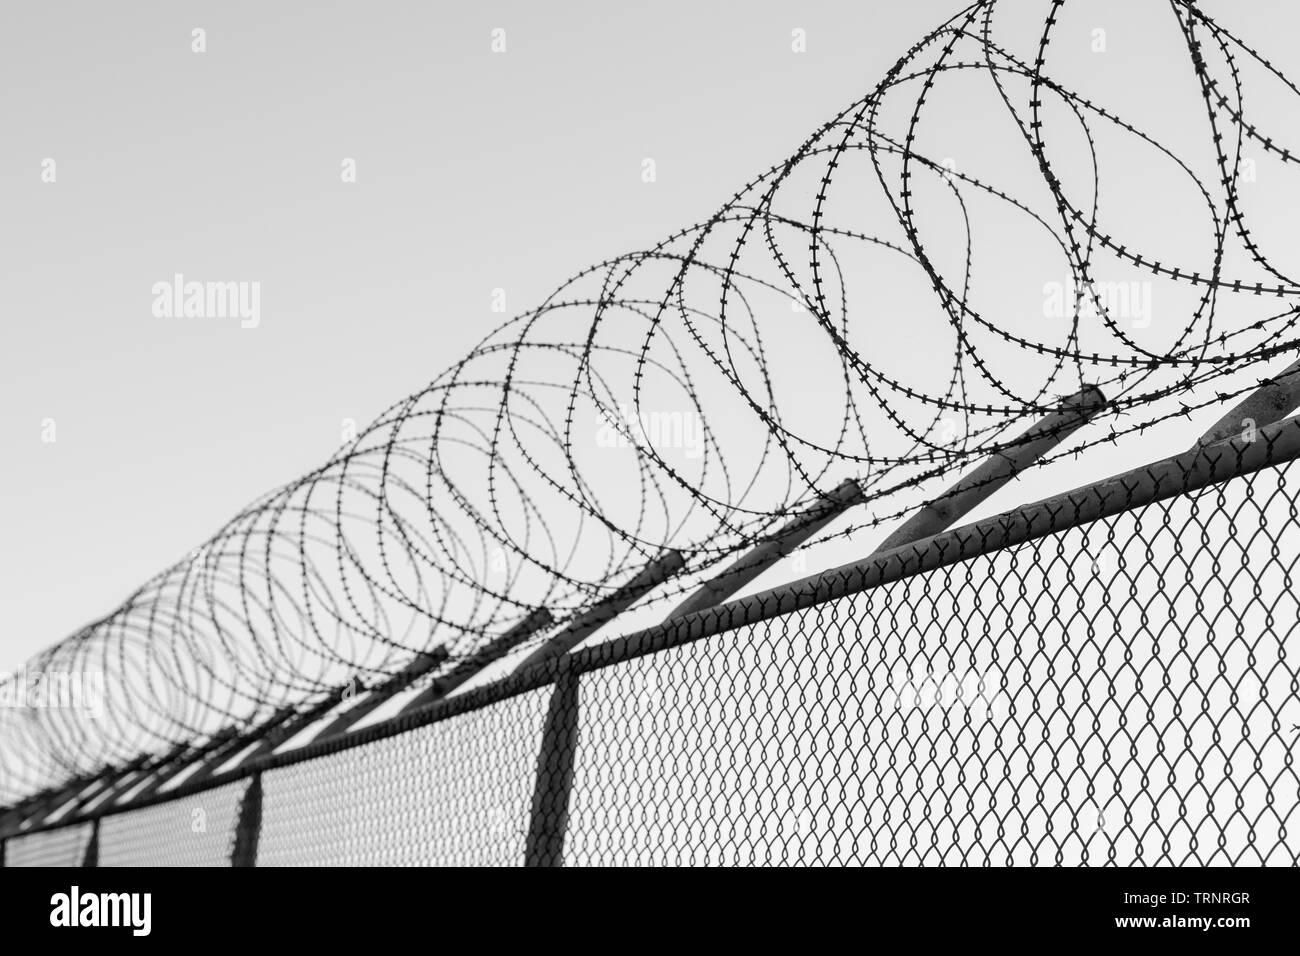 Coils of razor wire on top of a wire mesh perimeter fence Stock Photo